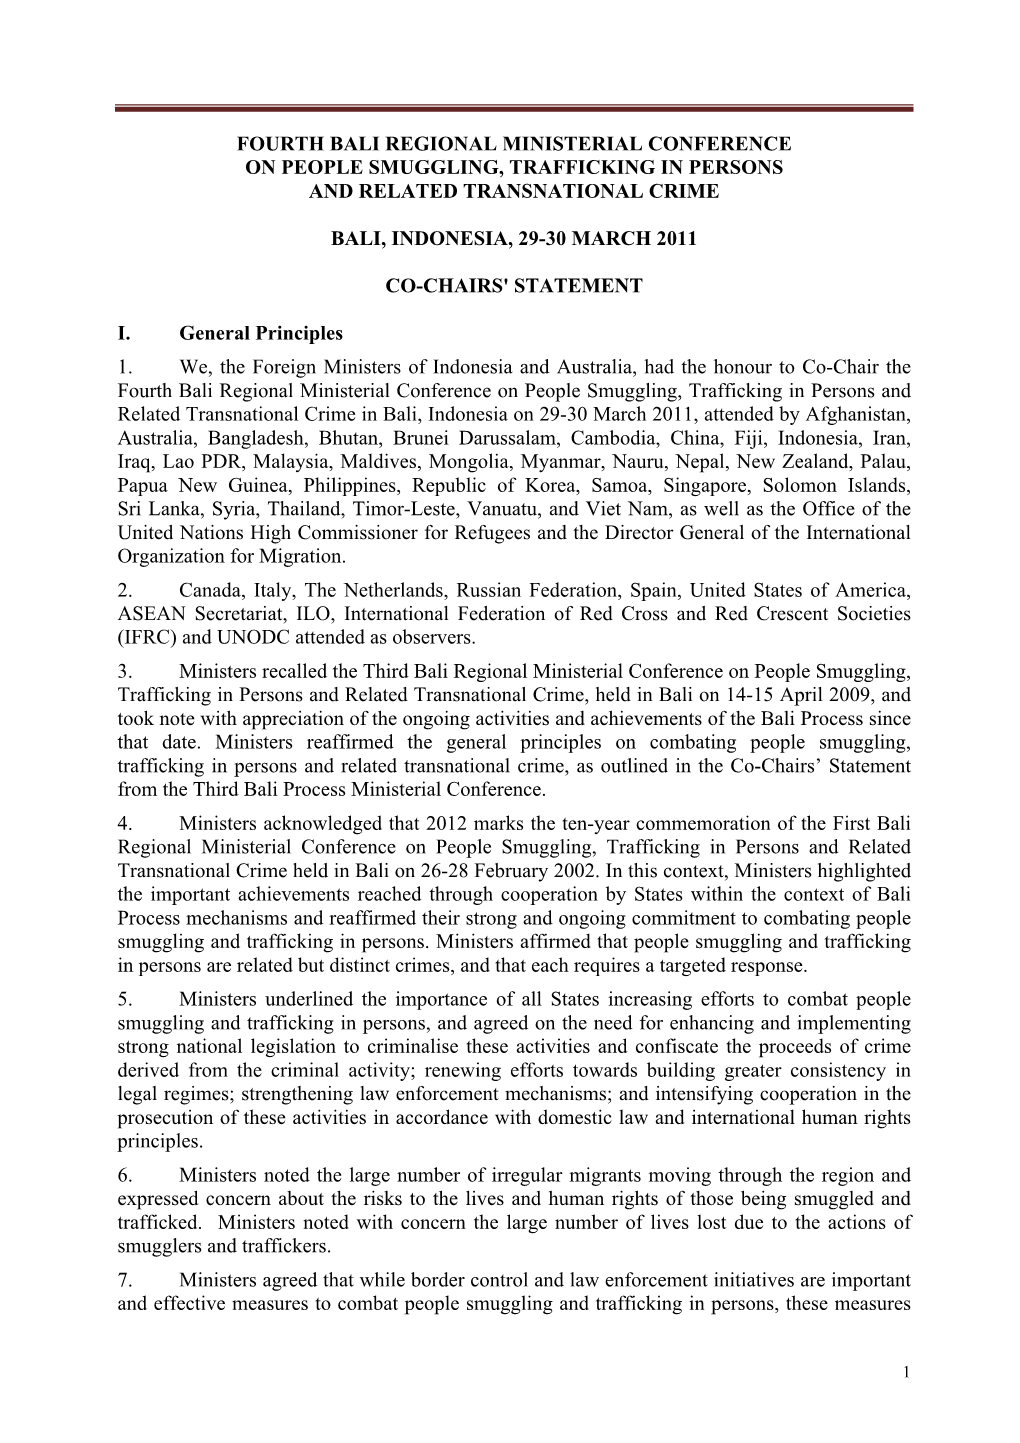 110330 FINAL Ministerial Co-Chairs Statement BRMC IV-1